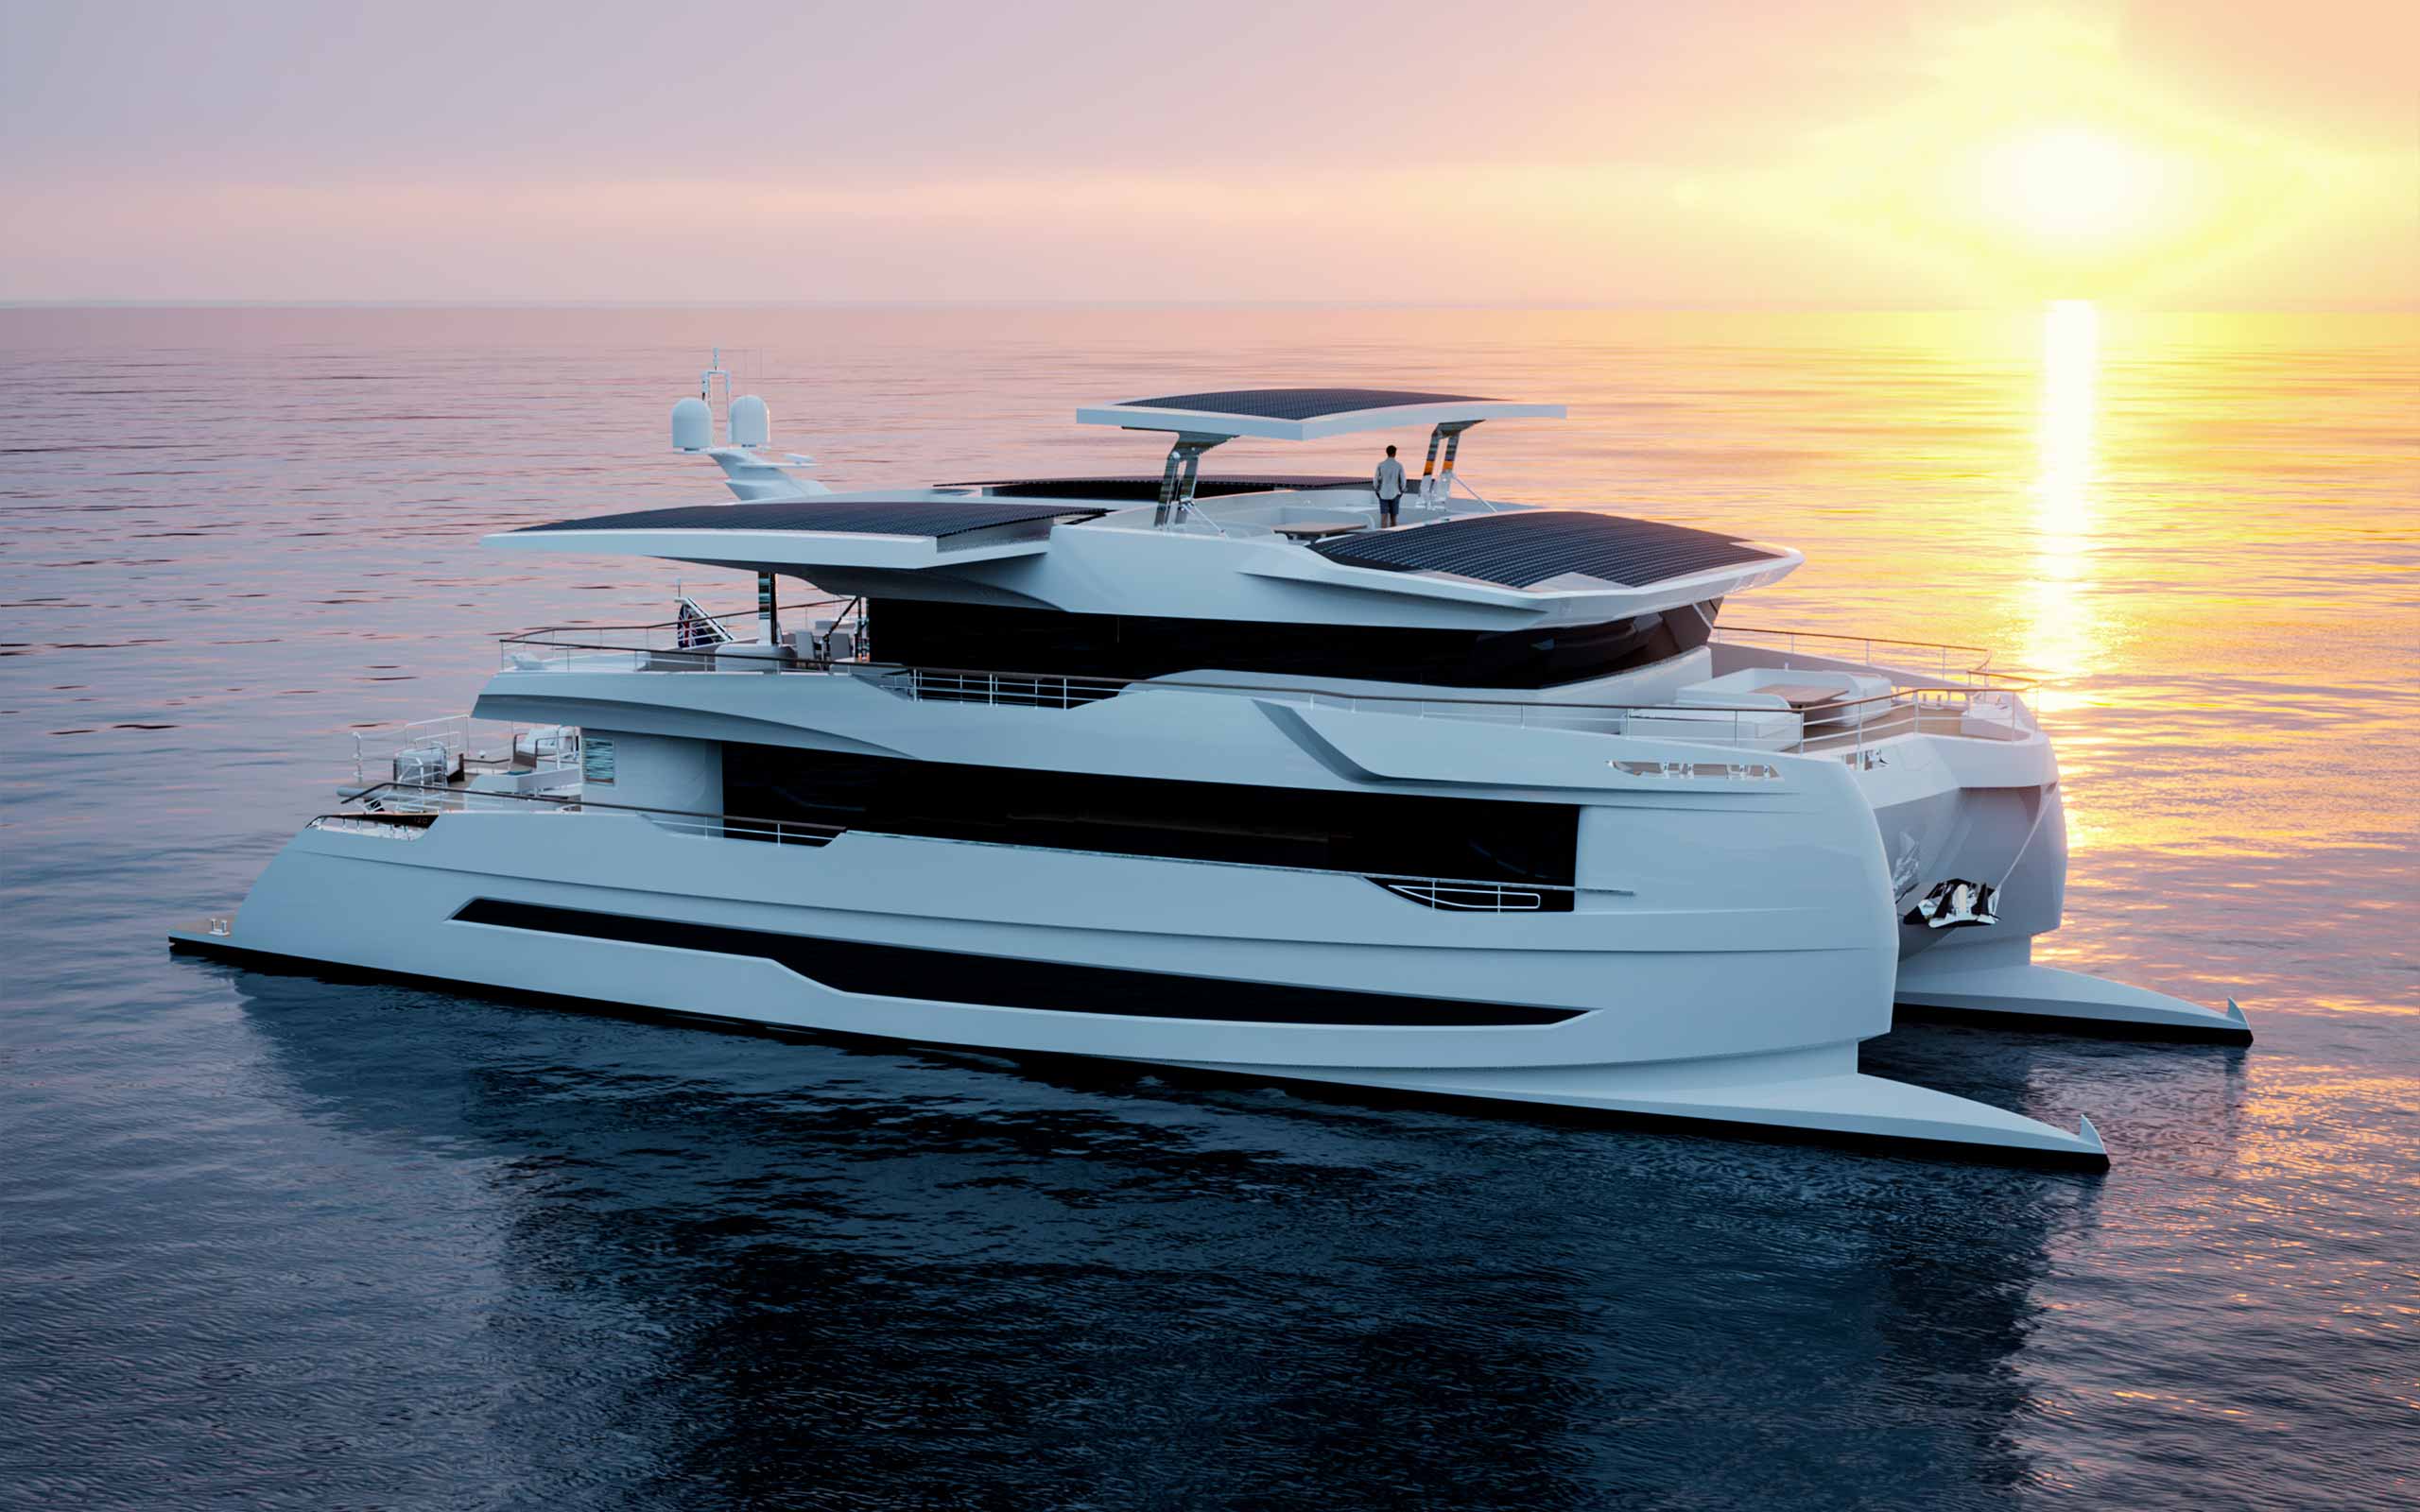 120 ft luxury yacht with solar panels on the roof